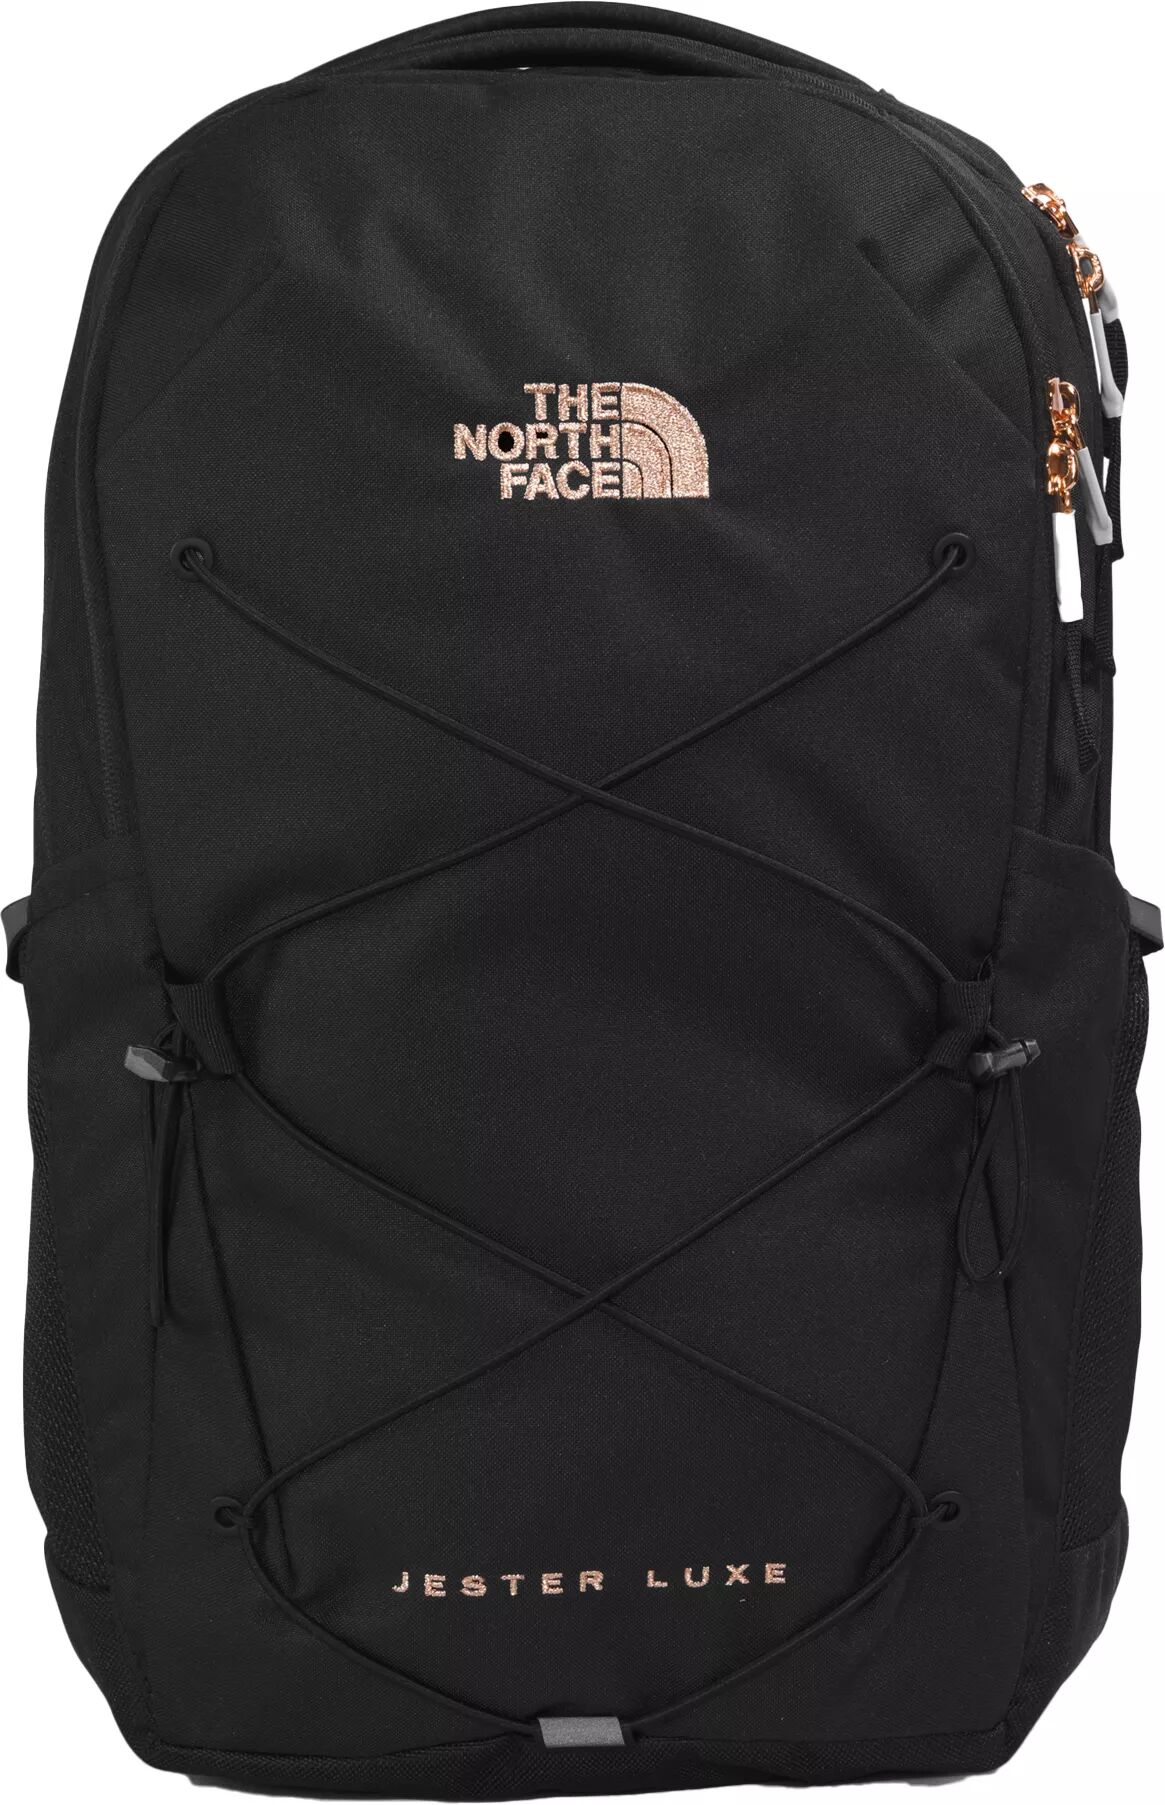 The North Face Women's Jester Backpack, Black